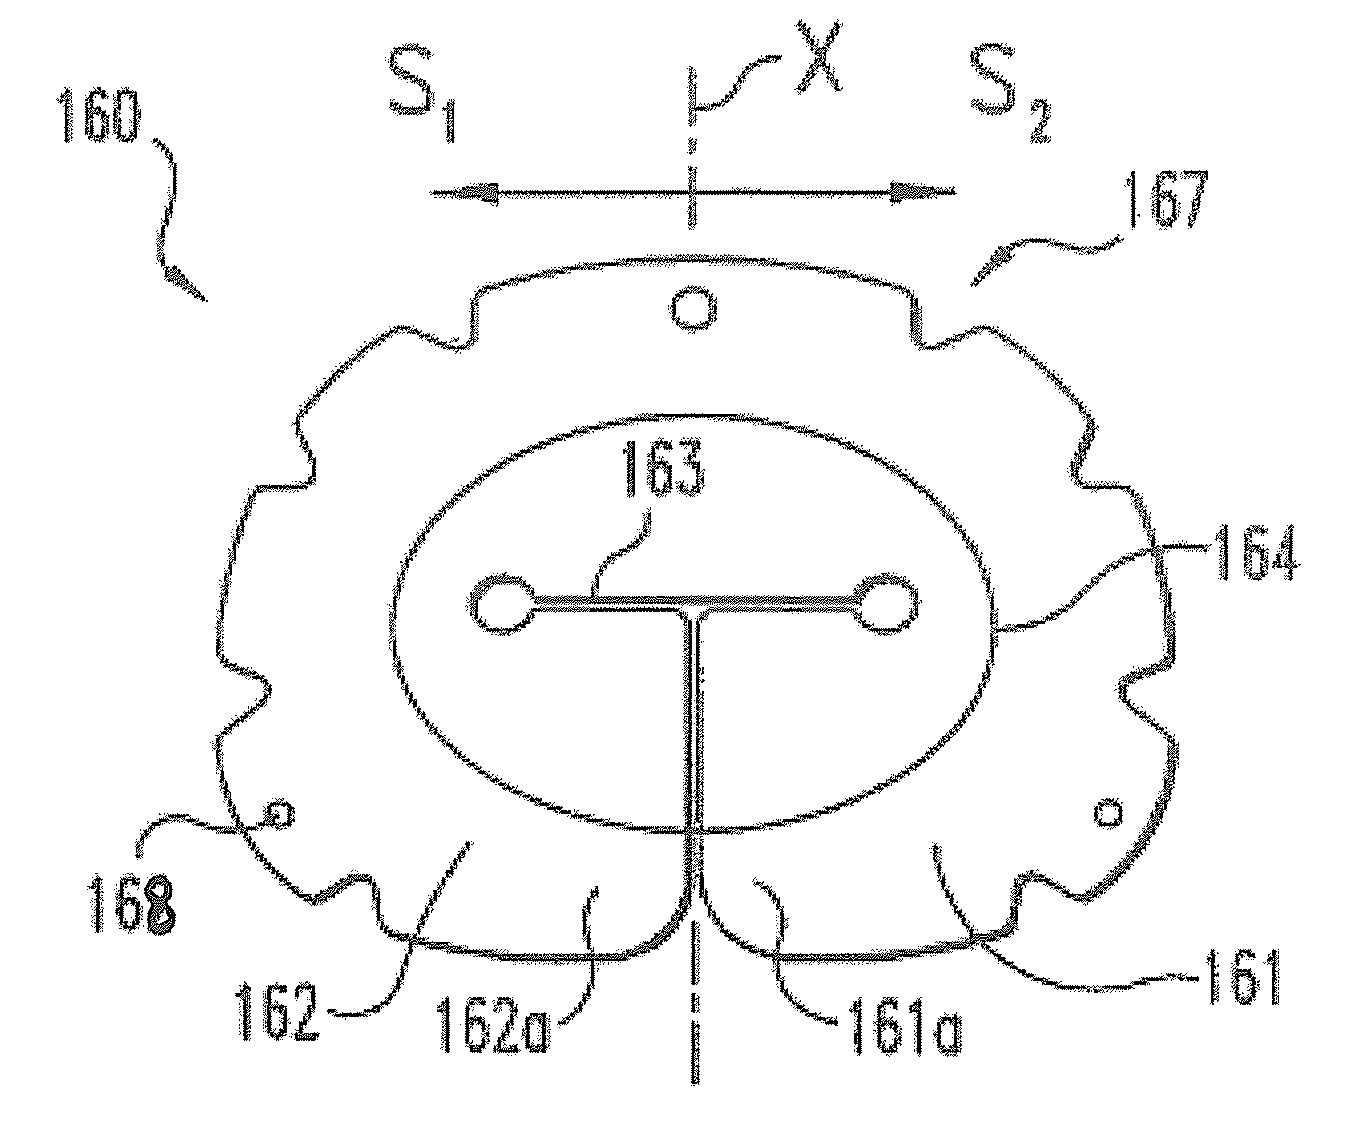 In-situ formable nucleus pulposus implant with water absorption and swelling capability